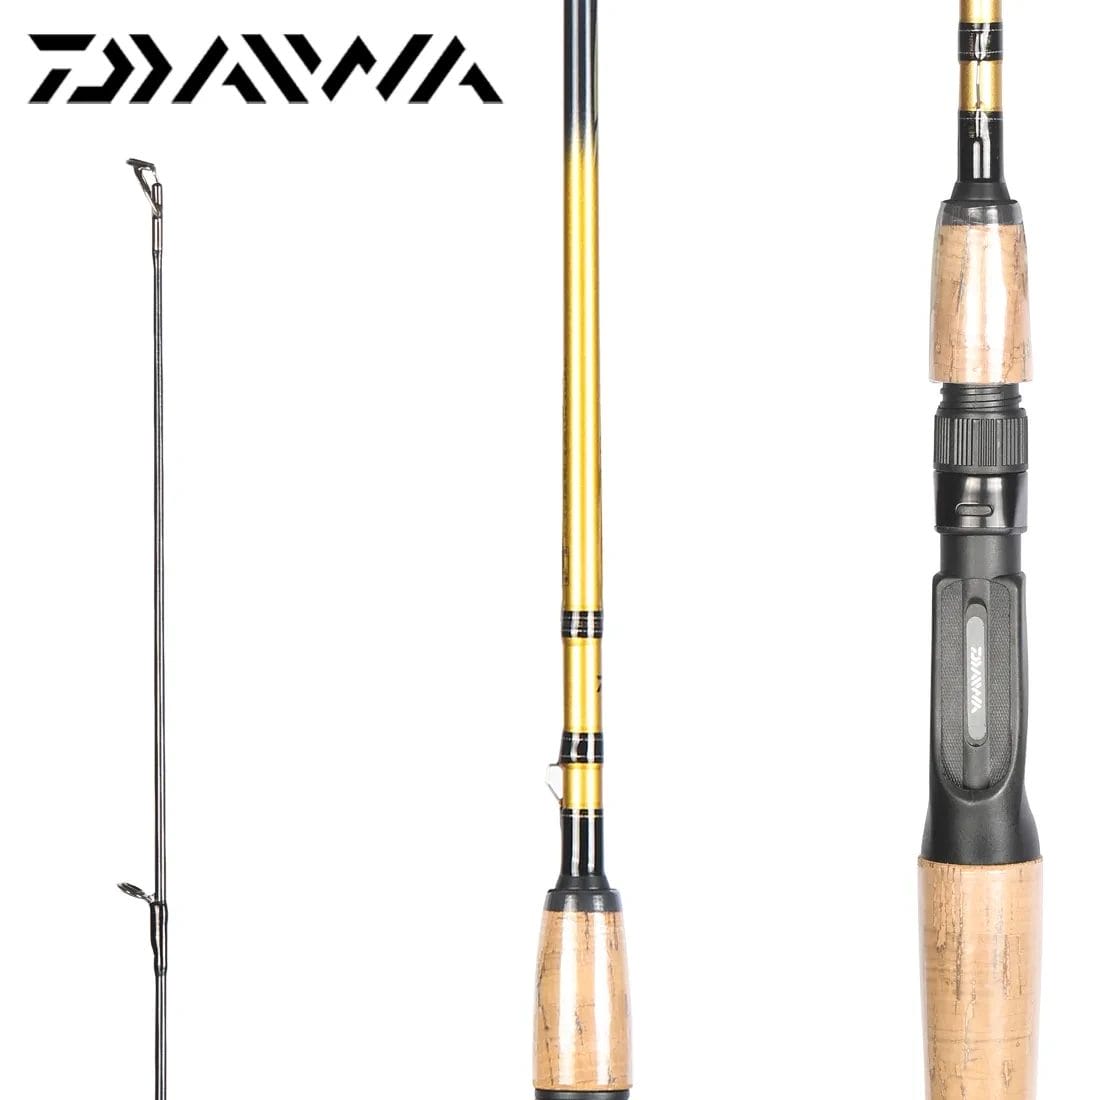 DAIWA CROSSFIRE CS New Fishing Rod Spinning Saltwater Cast Rod 2 sections  Corban For Lure Rod Japanese original